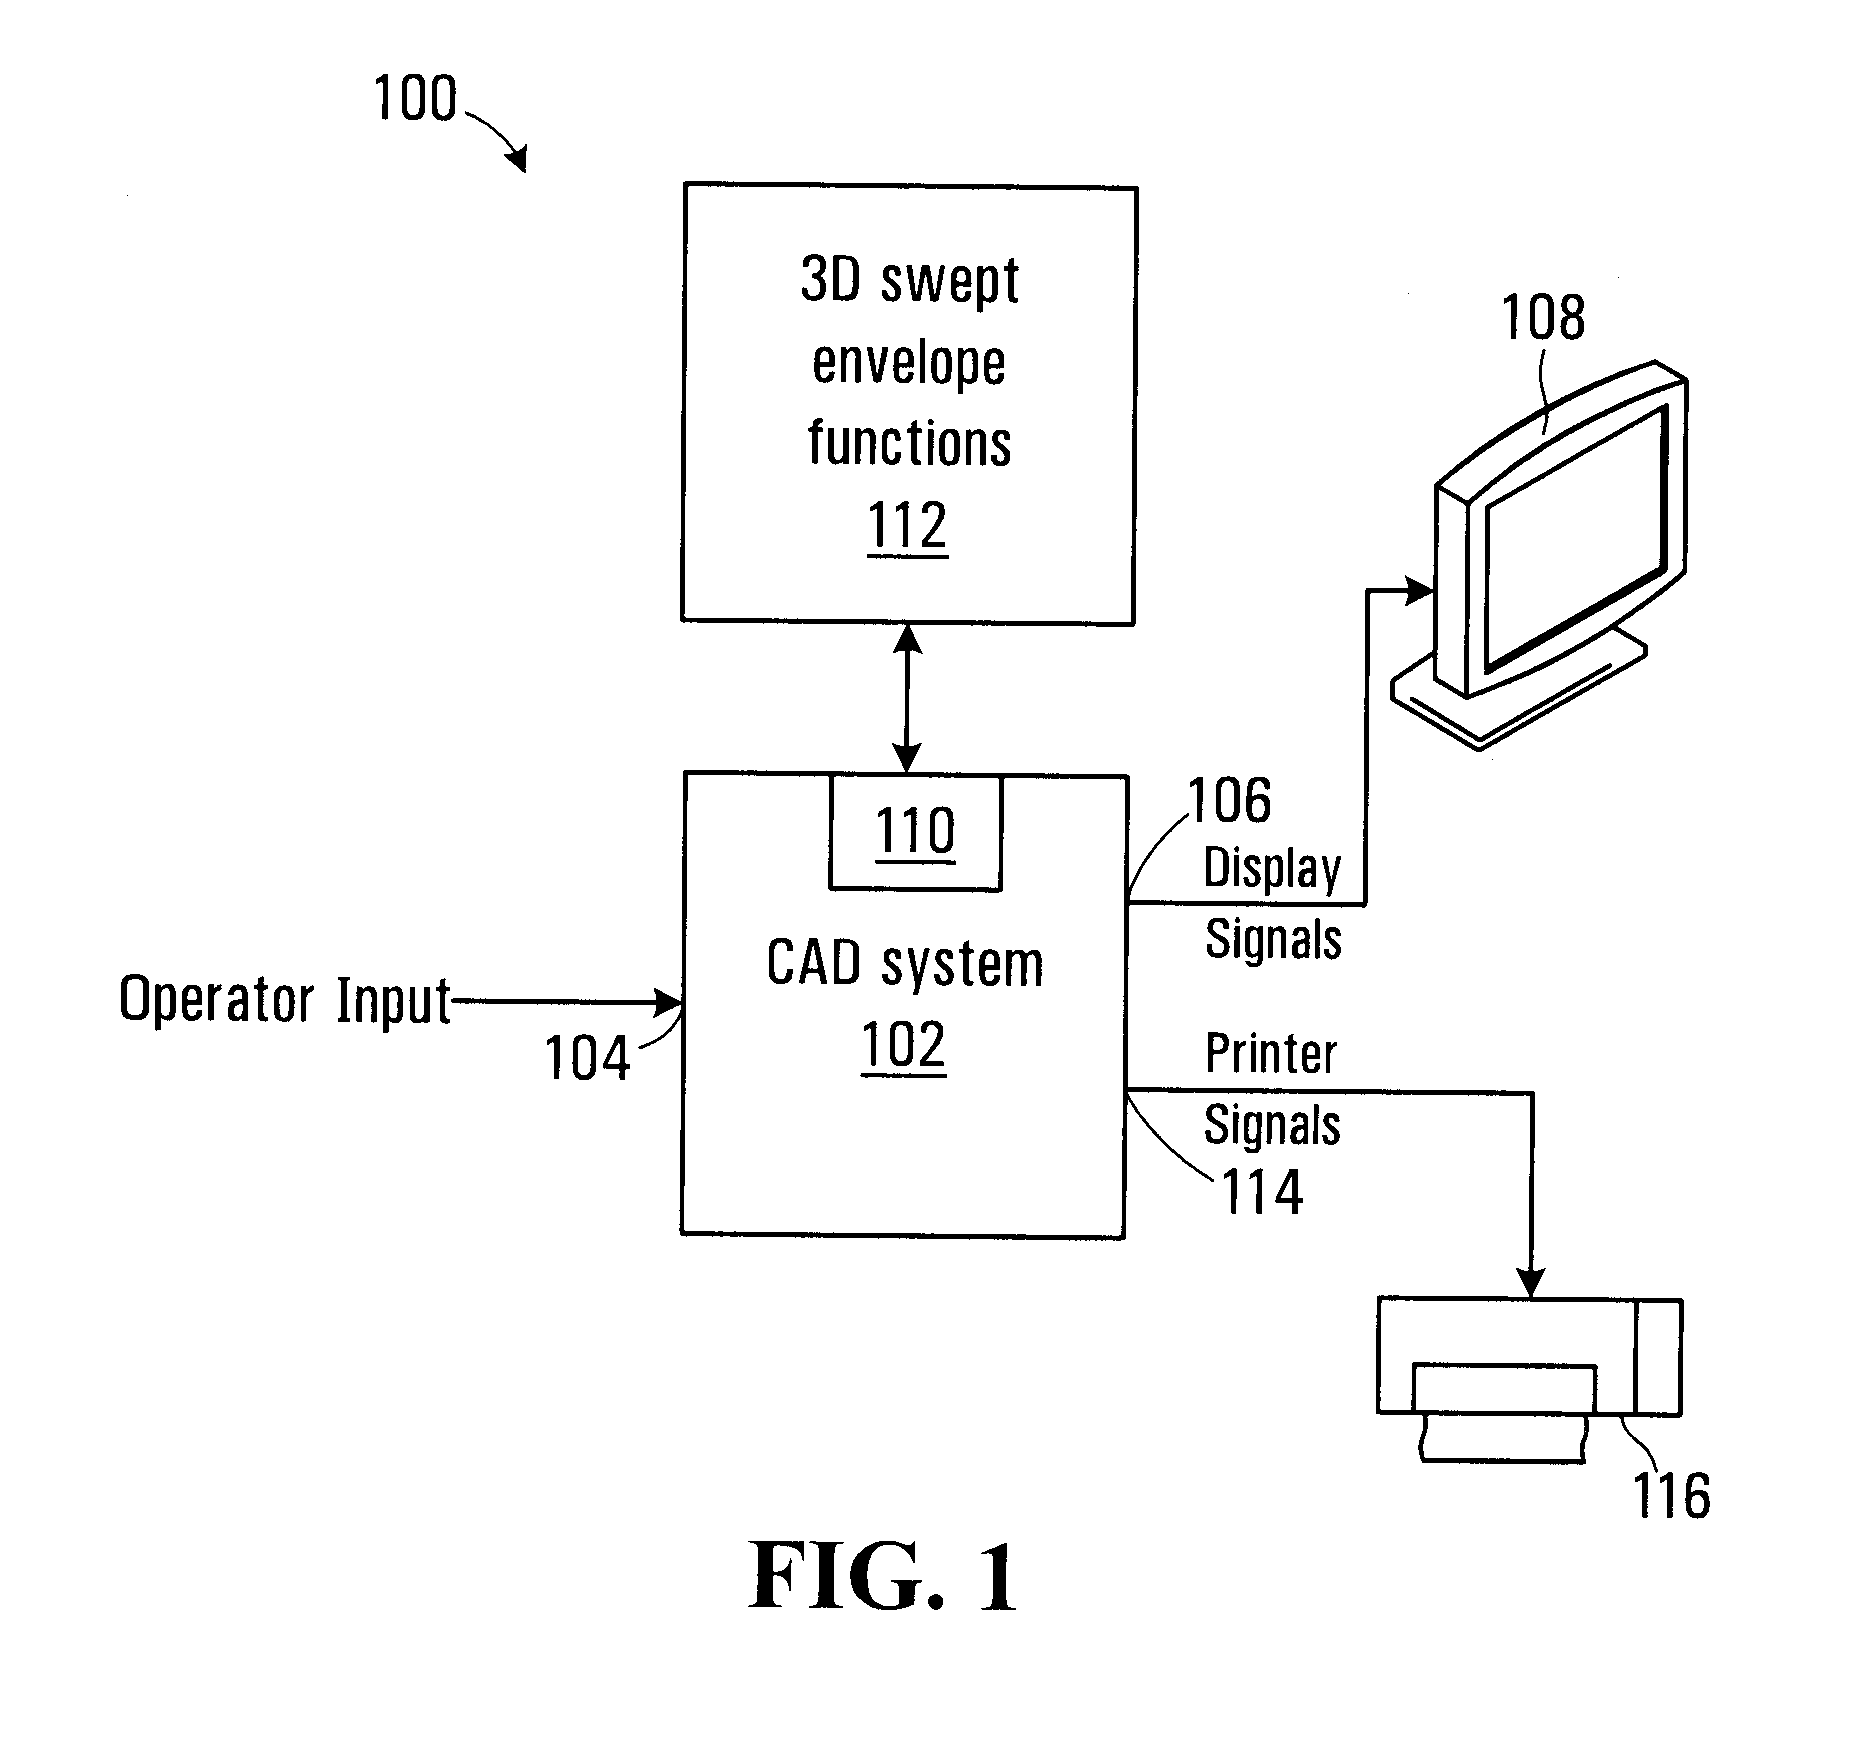 Process and apparatus for generating a three-dimensional swept envelope of a vehicle